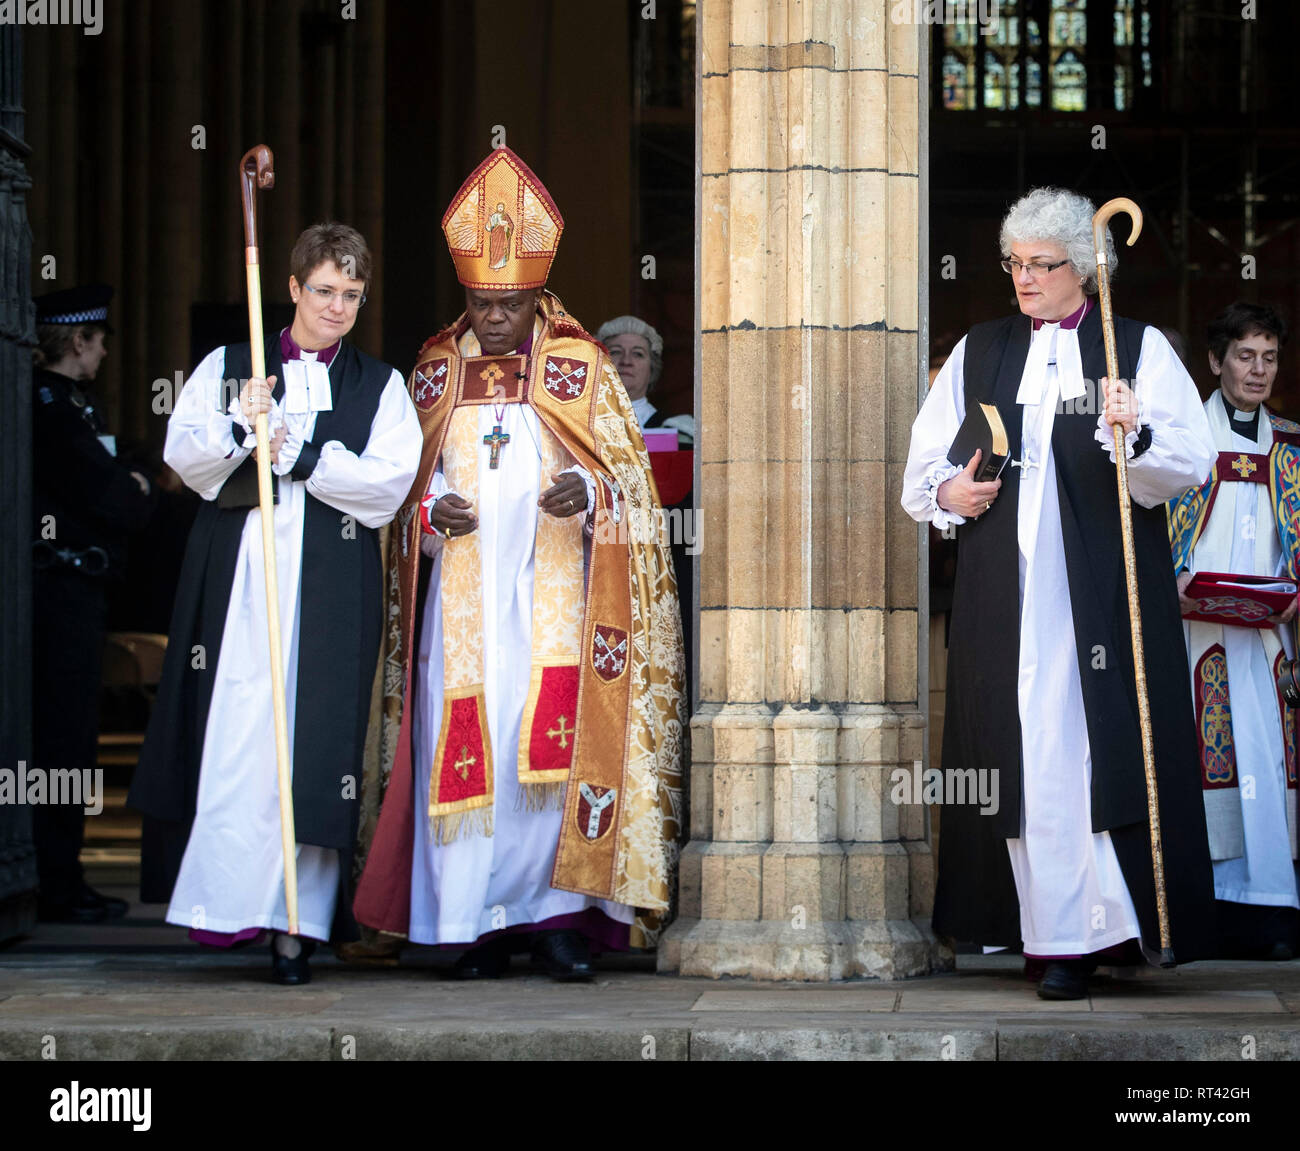 Dr Emma Gwyneth (left), Dr John Sentamu and Sarah Elizabeth following a double consecration of the The Reverend Dr Emma Gwyneth as the Suffragan Bishop of Penrith in the Diocese of Carlisle and The Venerable Sarah Elizabeth Clark as the Suffragan Bishop of Jarrow in the Diocese of Durham, during a ceremony at York Minster in Yorkshire. Stock Photo